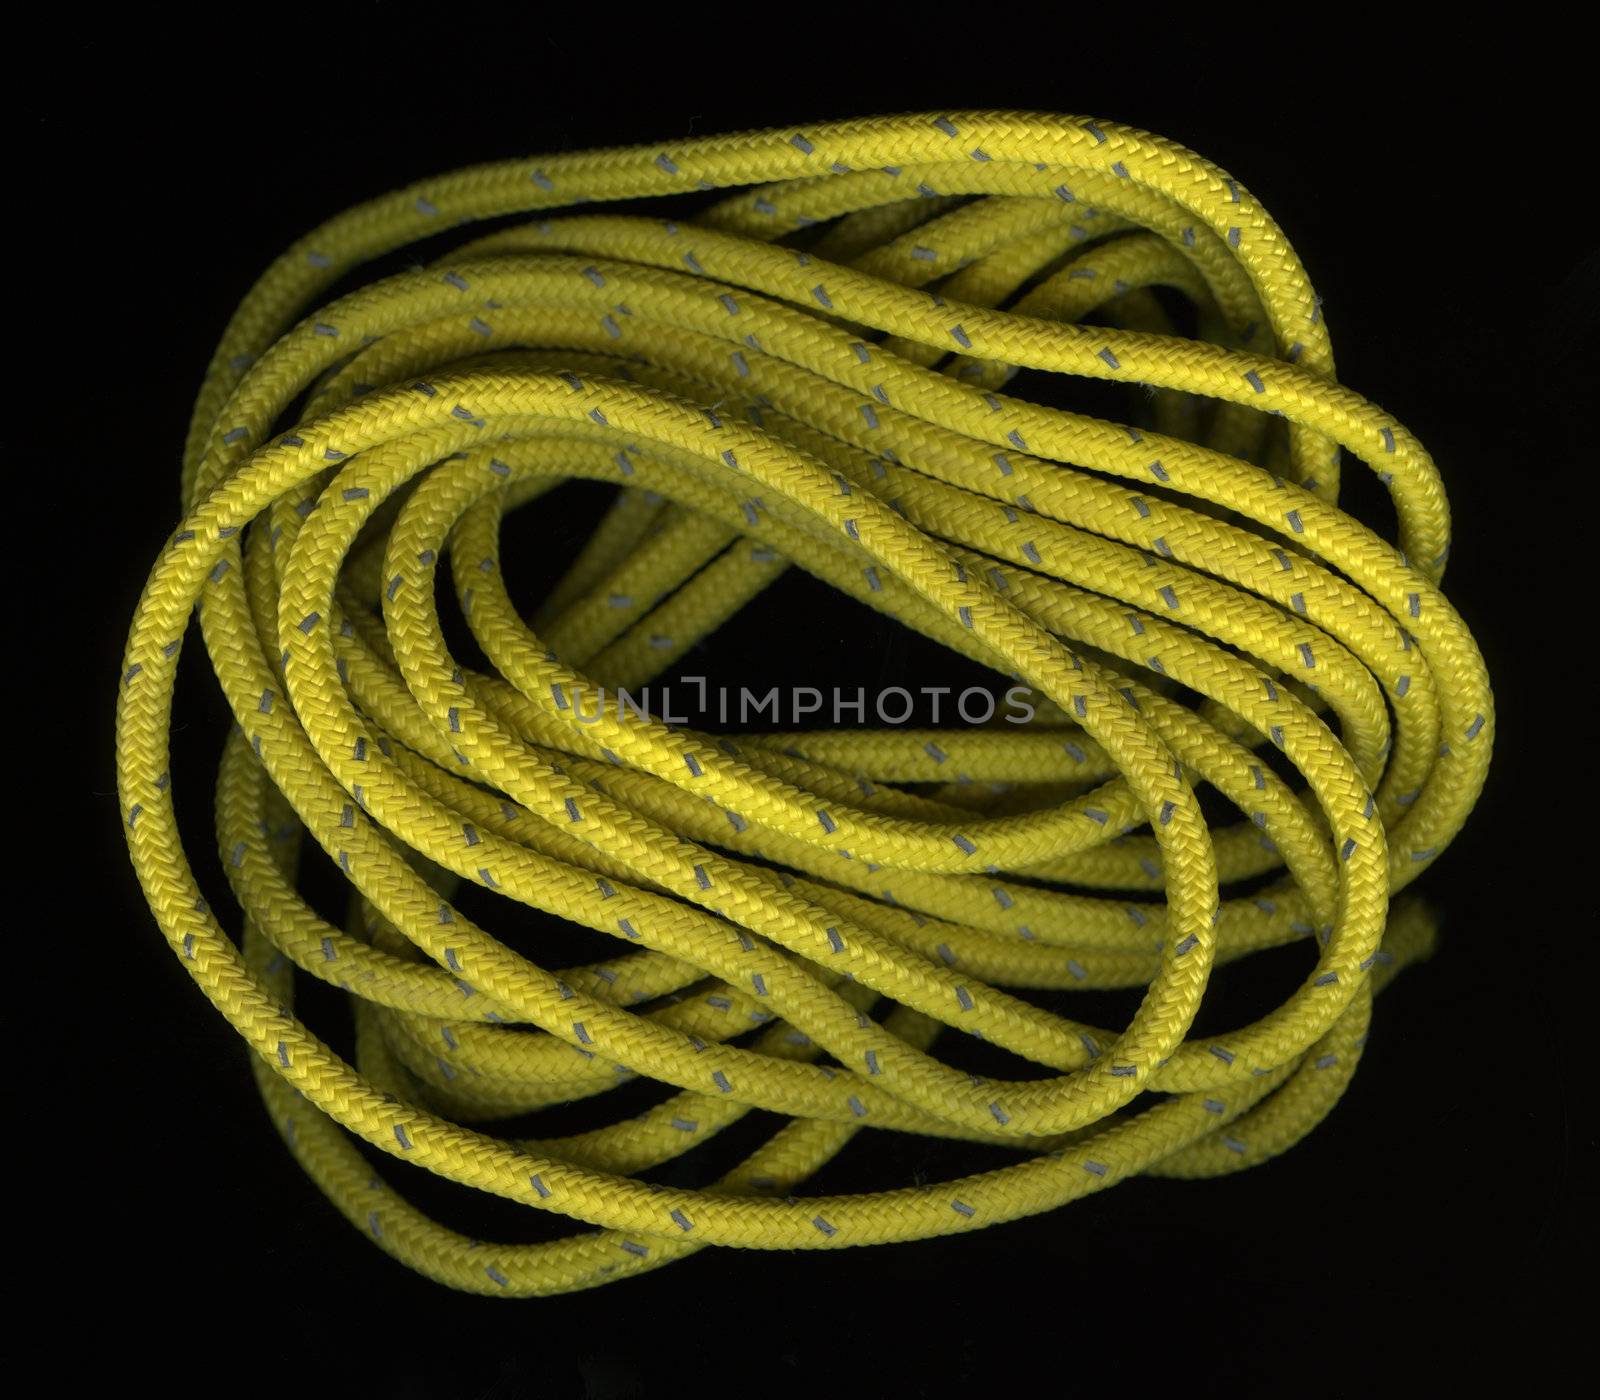 loose coils of yellow, nylon rope wit a reflective, silver thread on black background